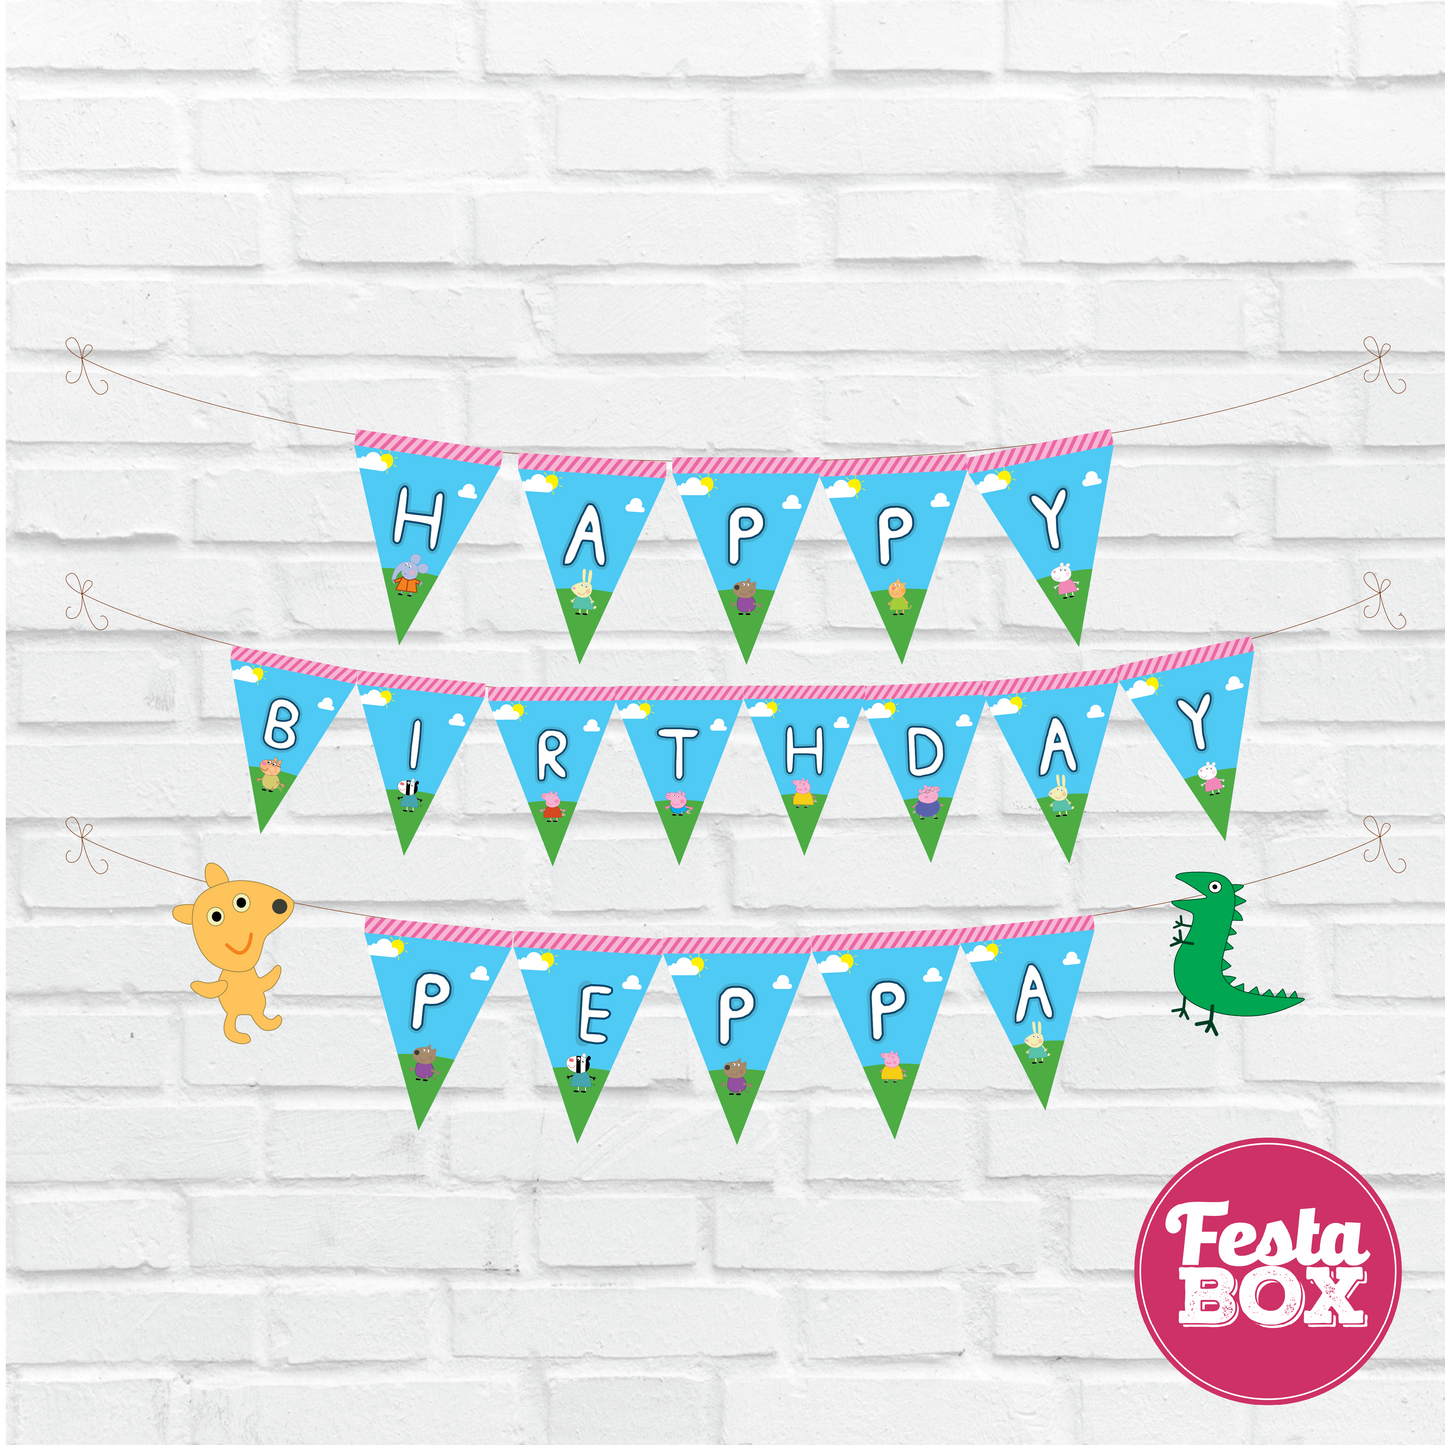 Background Bunting Banner for Birthday Party Decoration - Peppa Pig Theme 